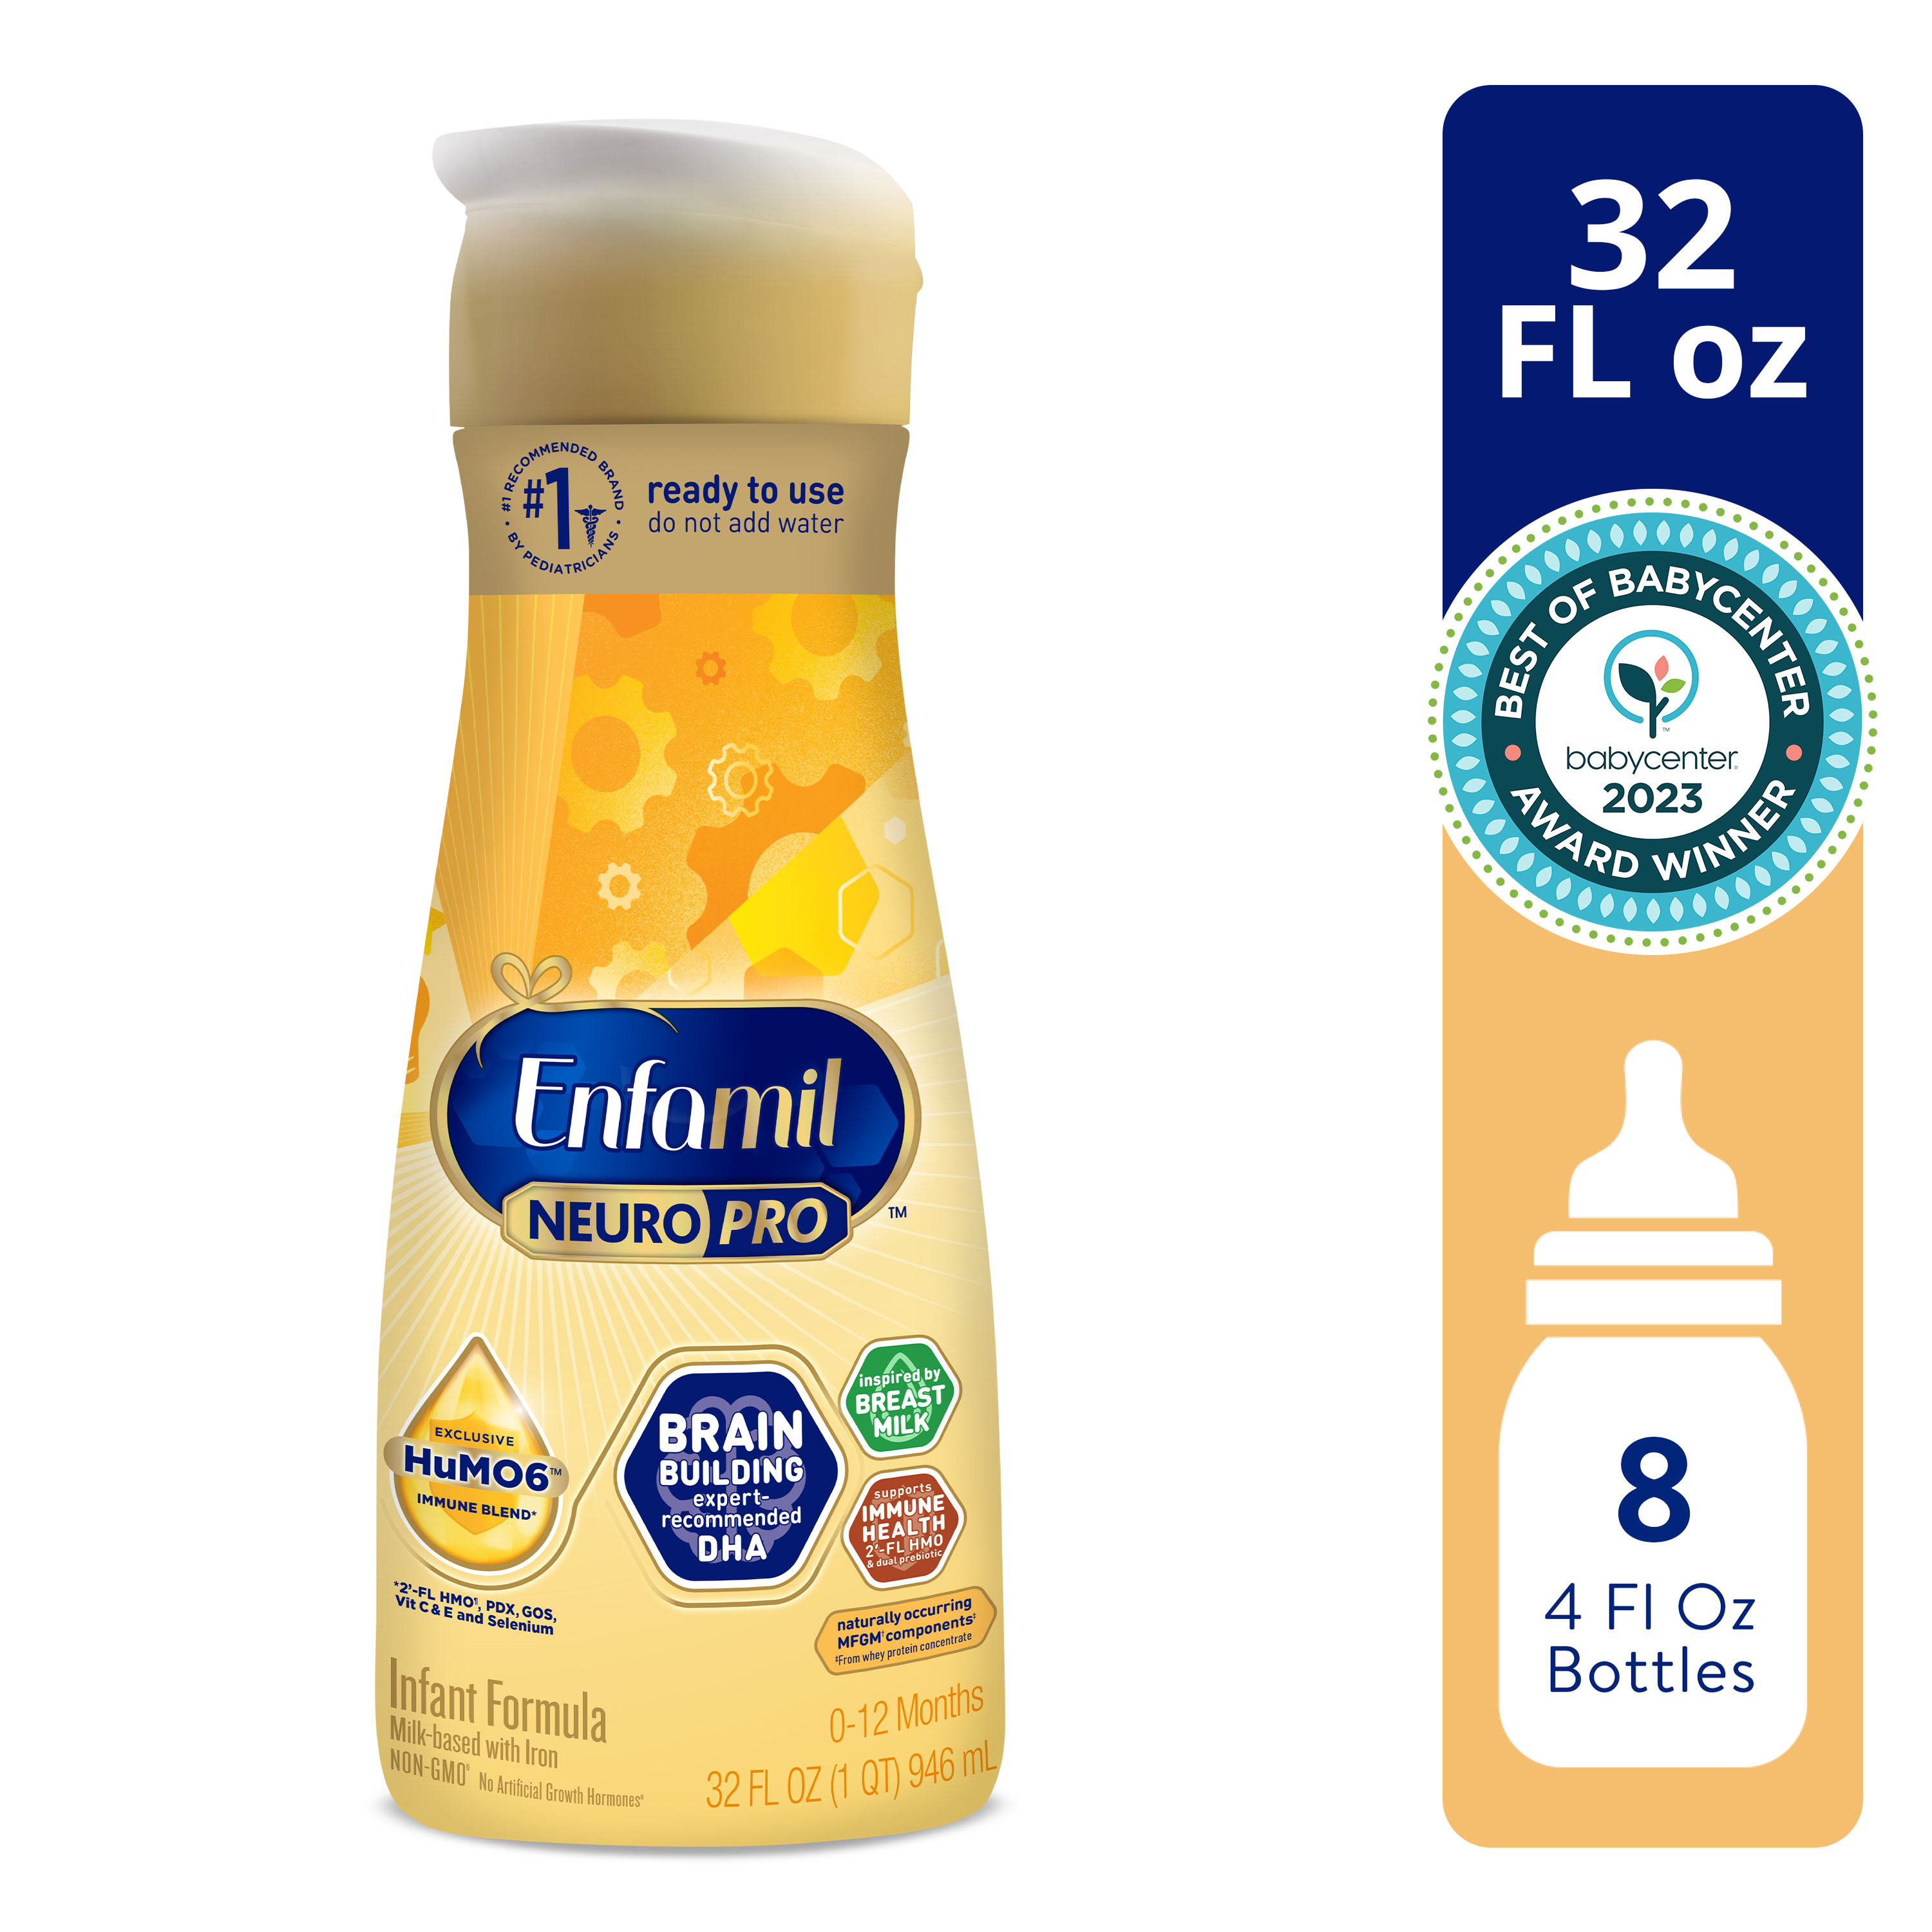 Enfamil NeuroPro Baby Formula, Milk-Based Infant Nutrition, MFGM* 5-Year Benefit, Expert-Recommended Brain-Building Omega-3 DHA, Exclusive HuMO6 Immune Blend, Non-GMO, 32 ​Fl Oz - image 1 of 13